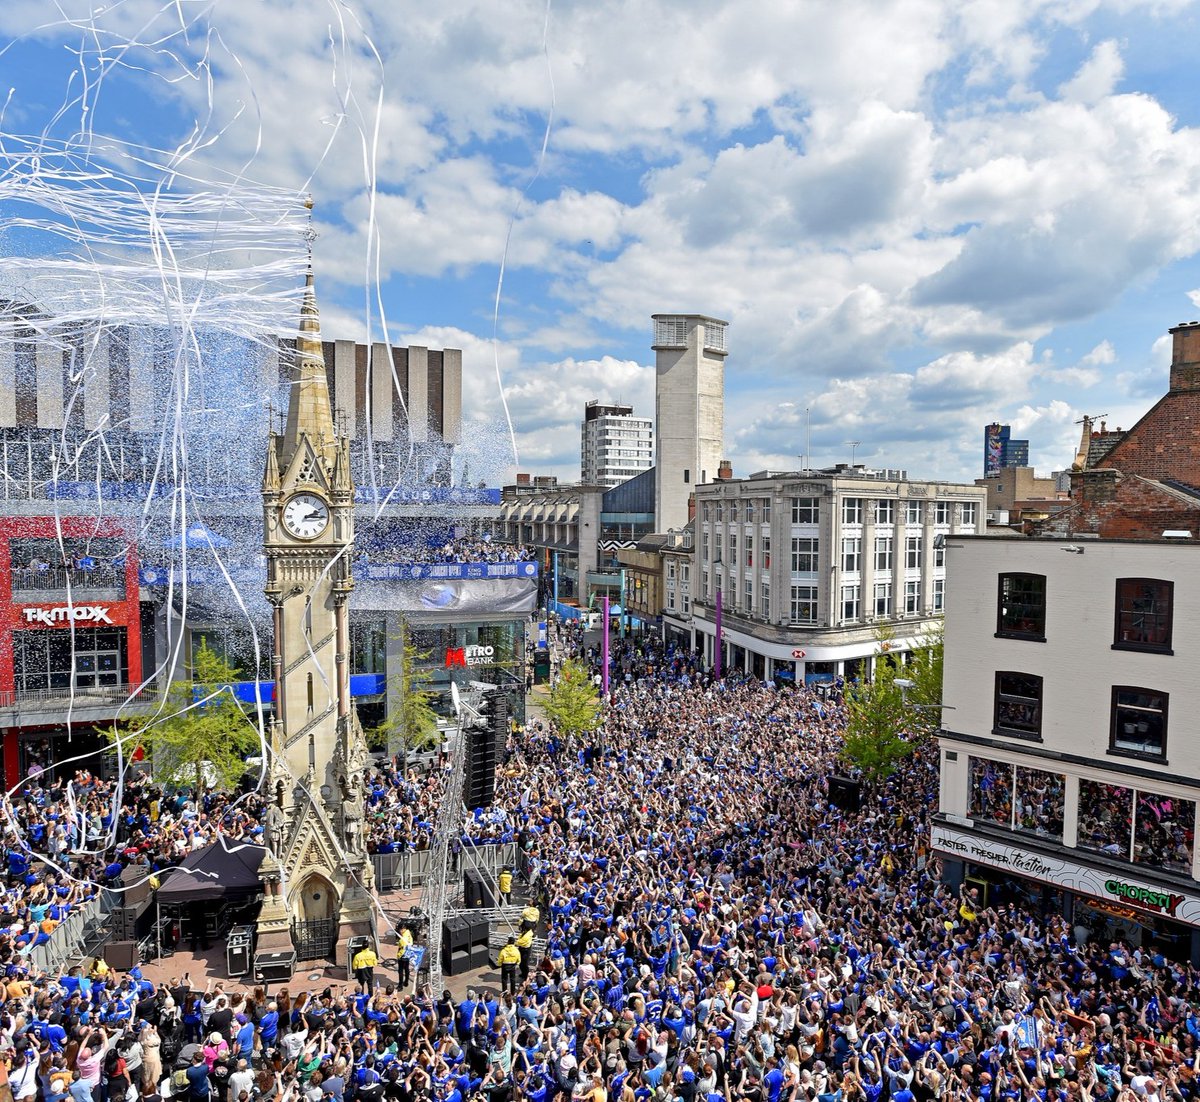 On Sunday 50,000 of you met us at the Clock Tower to turn the city blue celebrating Leicester's return to the Premier League and lifting the Championship trophy for the 8th time! Love this city! #visitleicester #leicester #lcfc #soccer #football #festival @lcfc